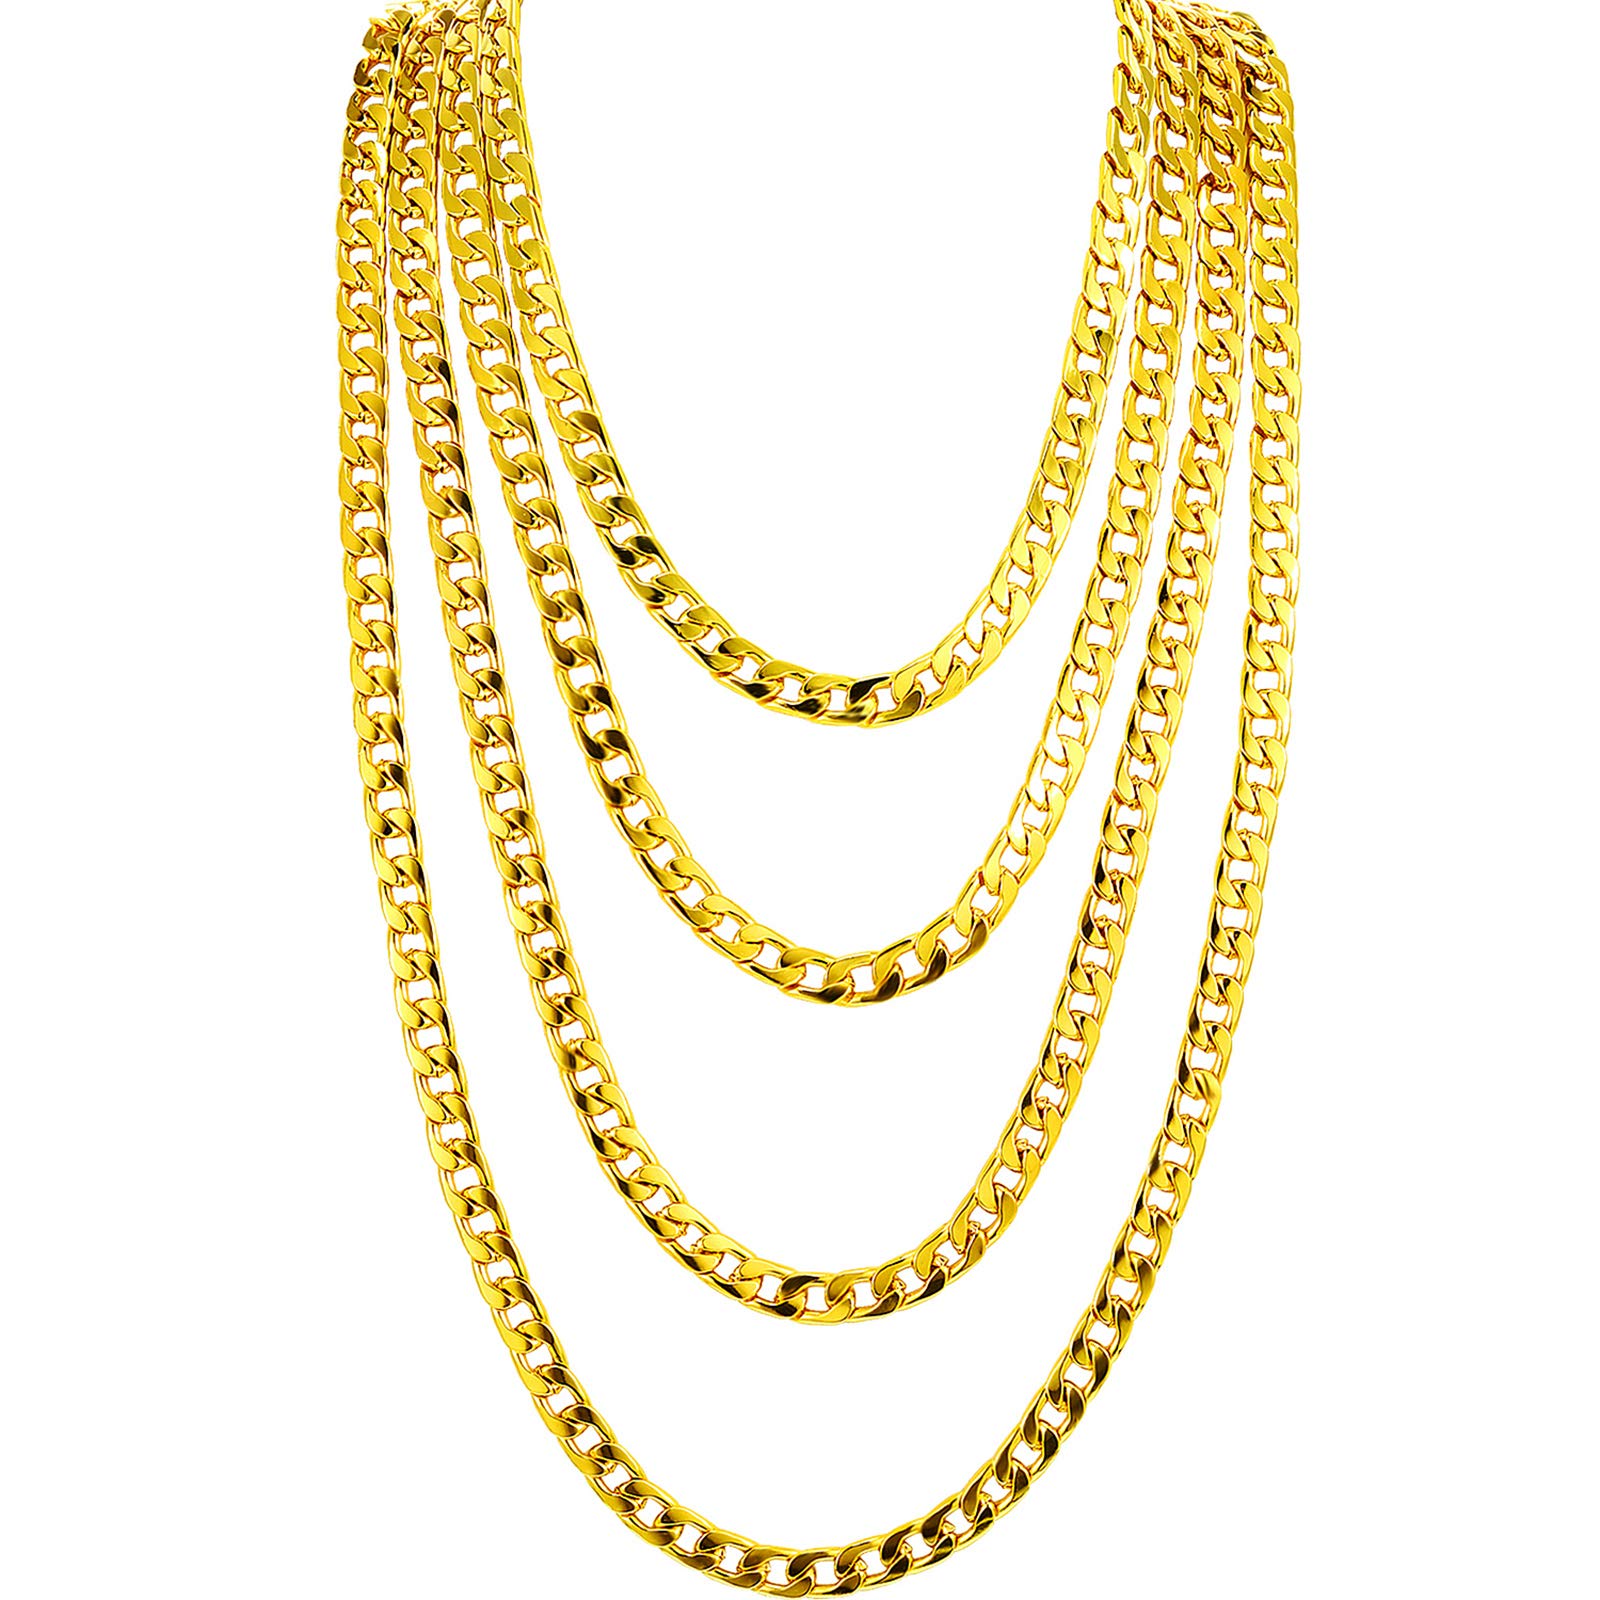 4 Pieces Hip Hop Rapper Faux Gold Chain Necklace Chunky Necklace Stainless Steel Chain for 80's, 90's Punk Style Hip Hop Chain Necklace, 8 MM 24 Inch Long